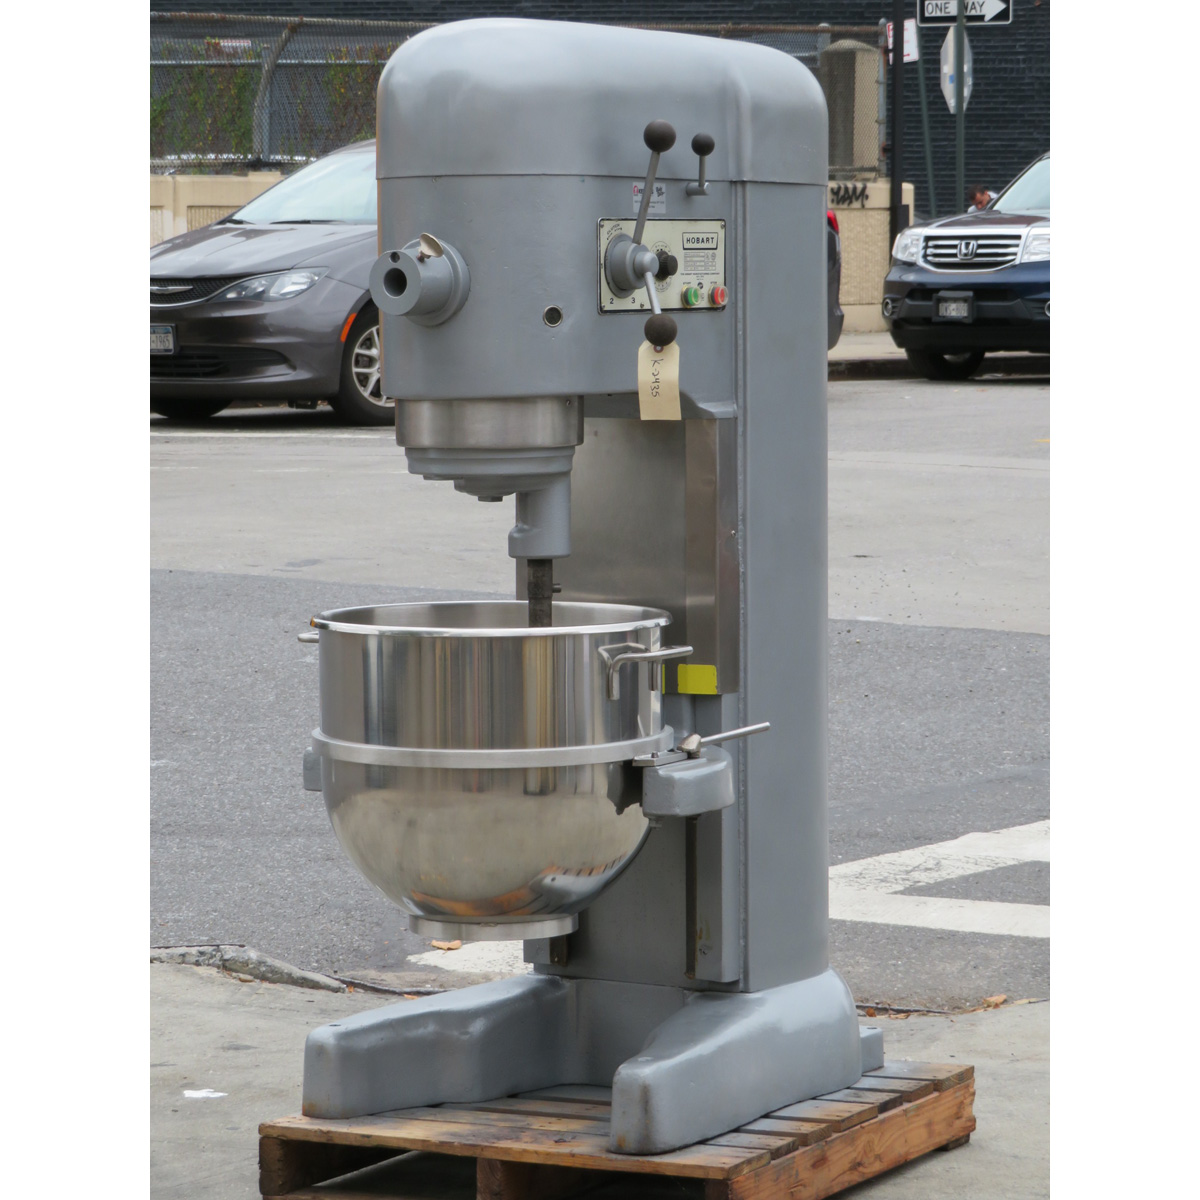 Hobart 80 Quart M802 Mixer With #22 Attachment Hub, Used Excellent Condition